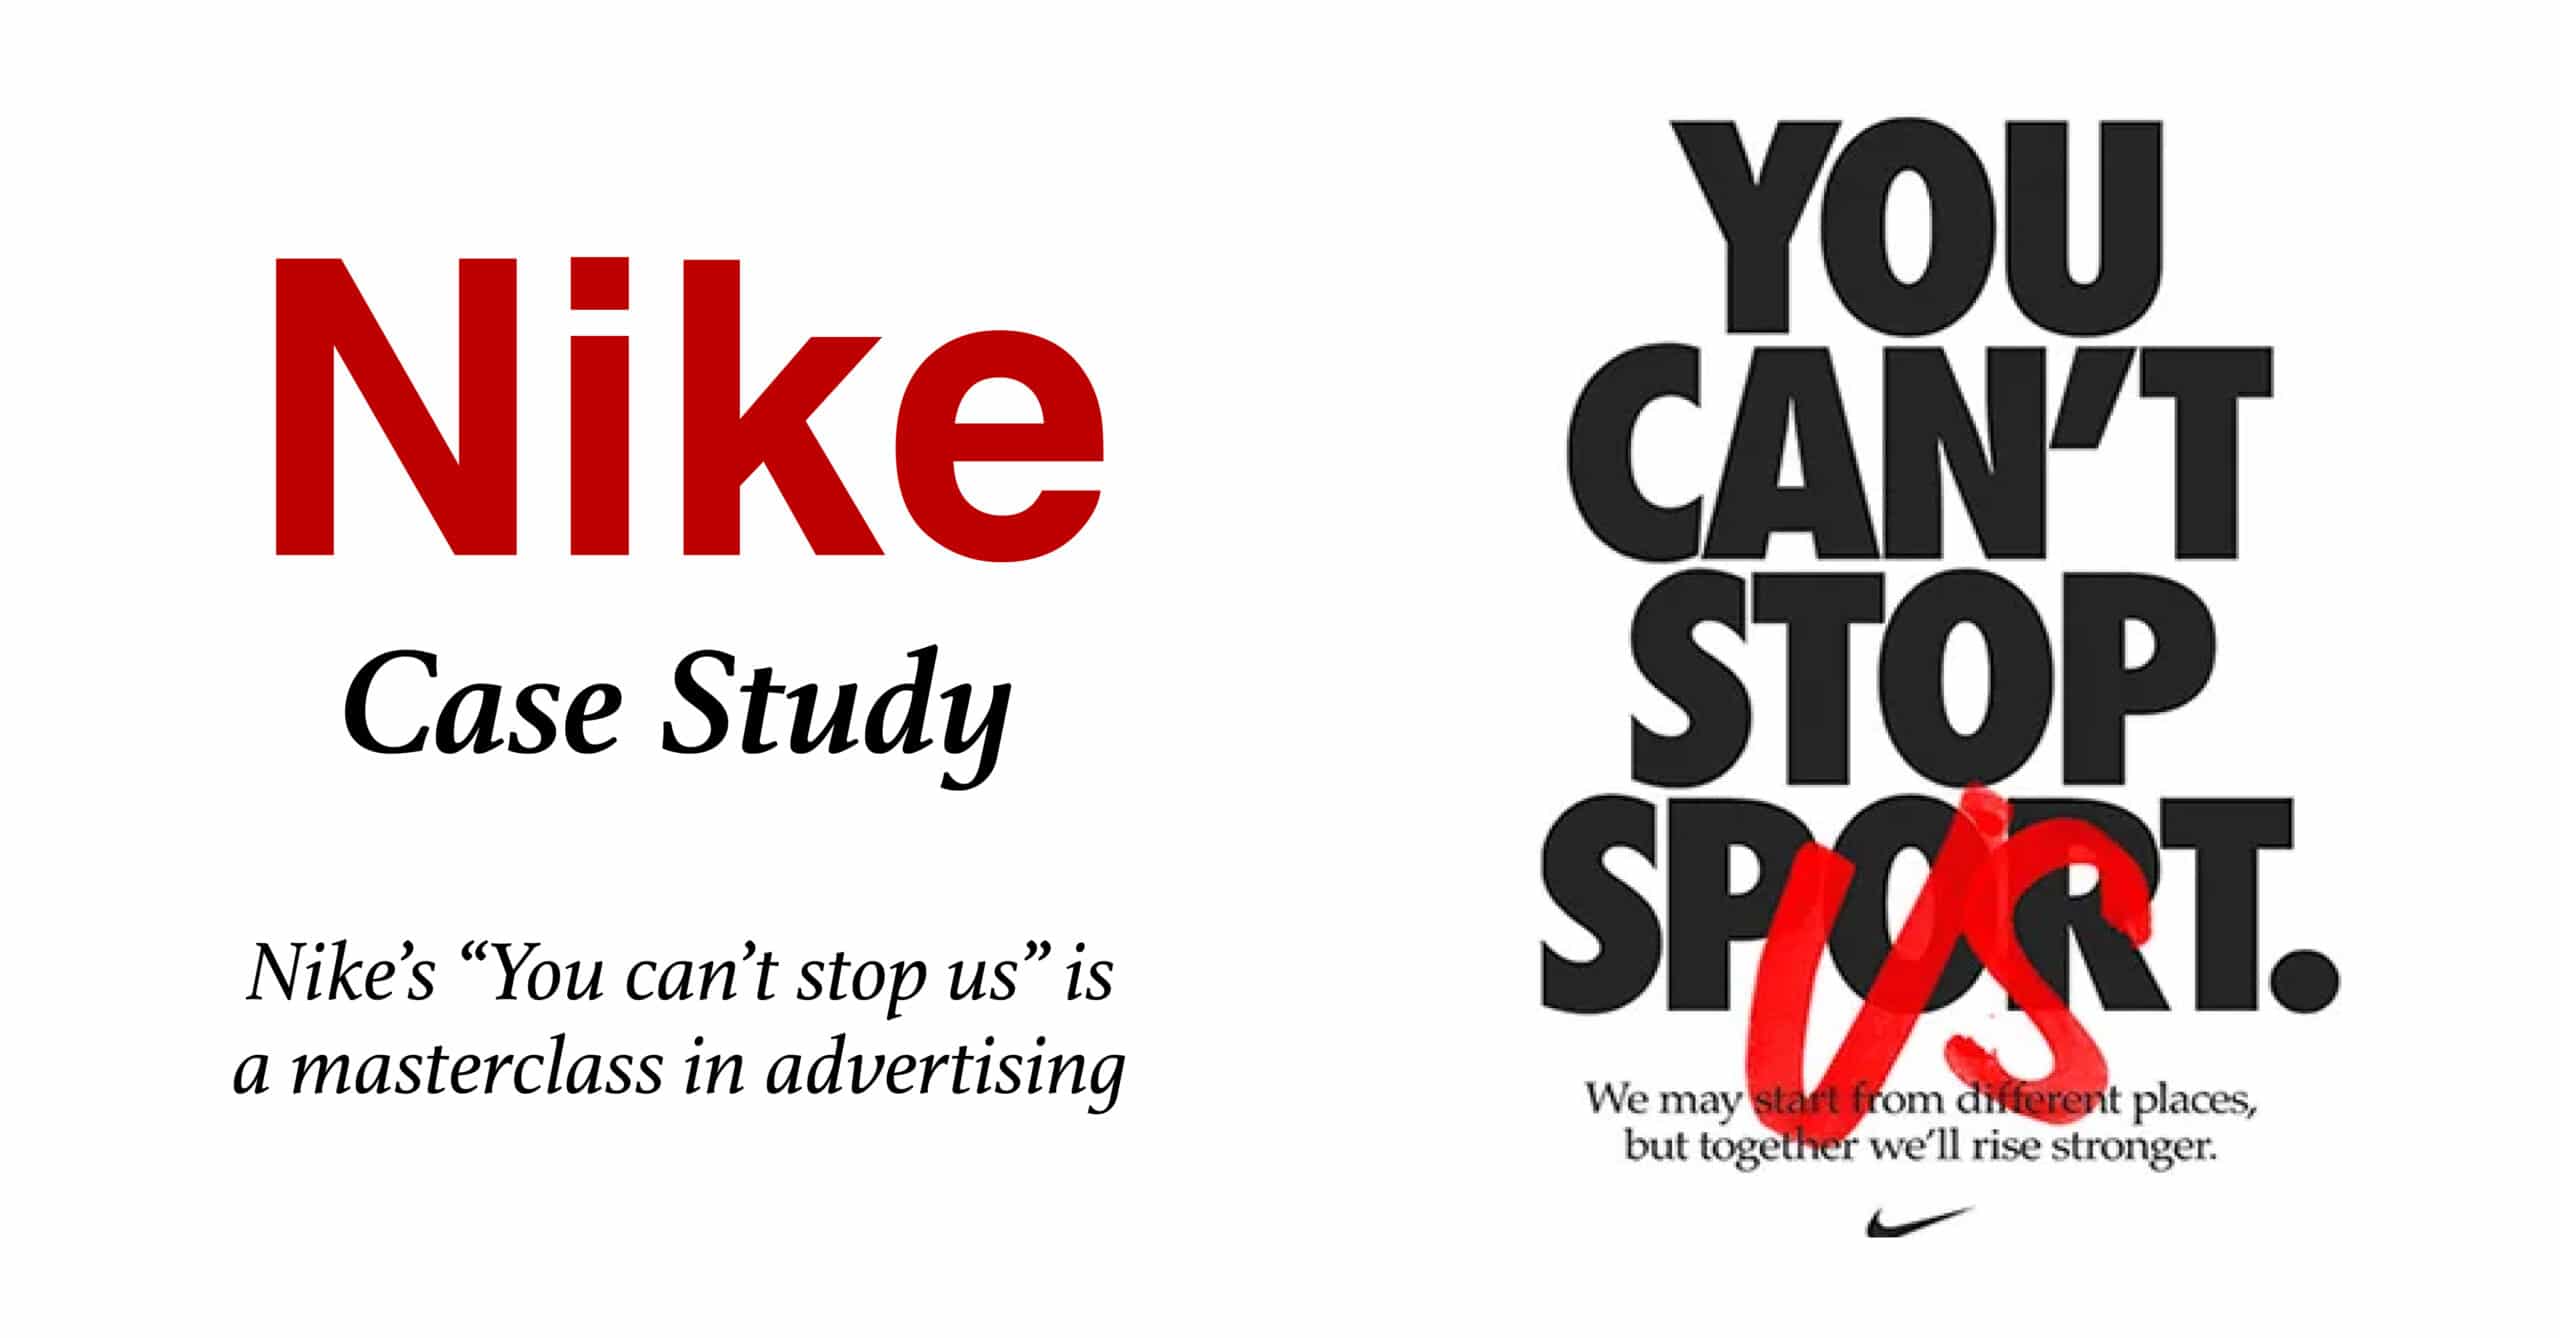 Nike can't is an advertising masterclass